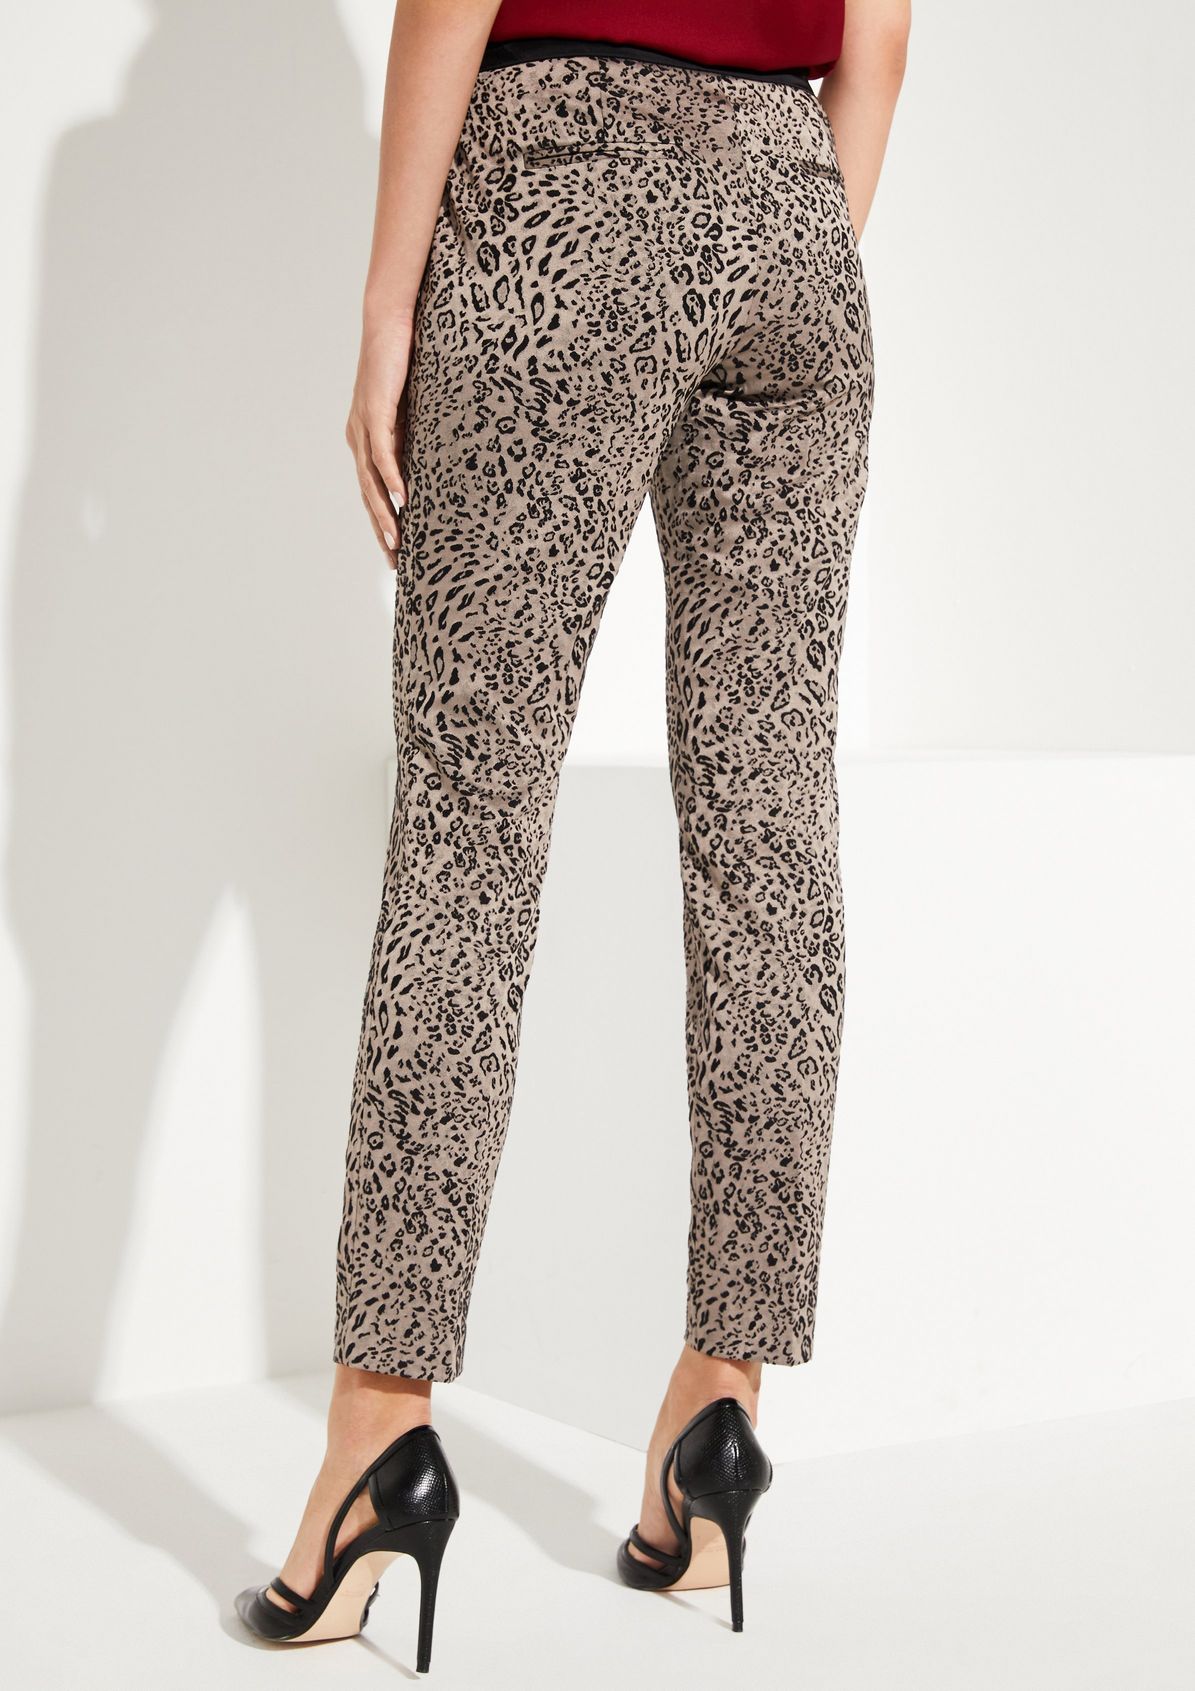 Satin trousers with an exciting leopard pattern from comma